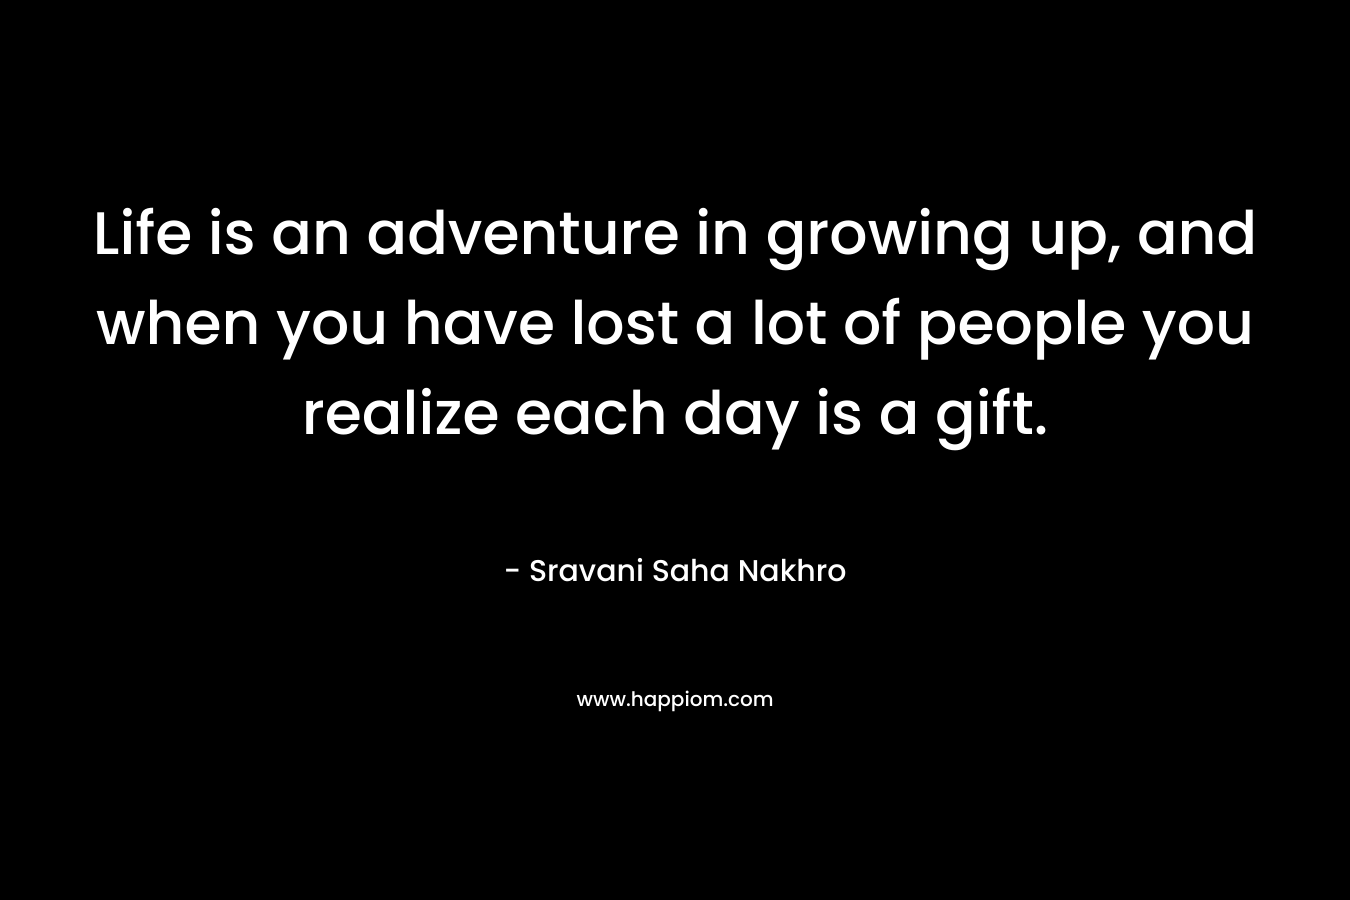 Life is an adventure in growing up, and when you have lost a lot of people you realize each day is a gift.